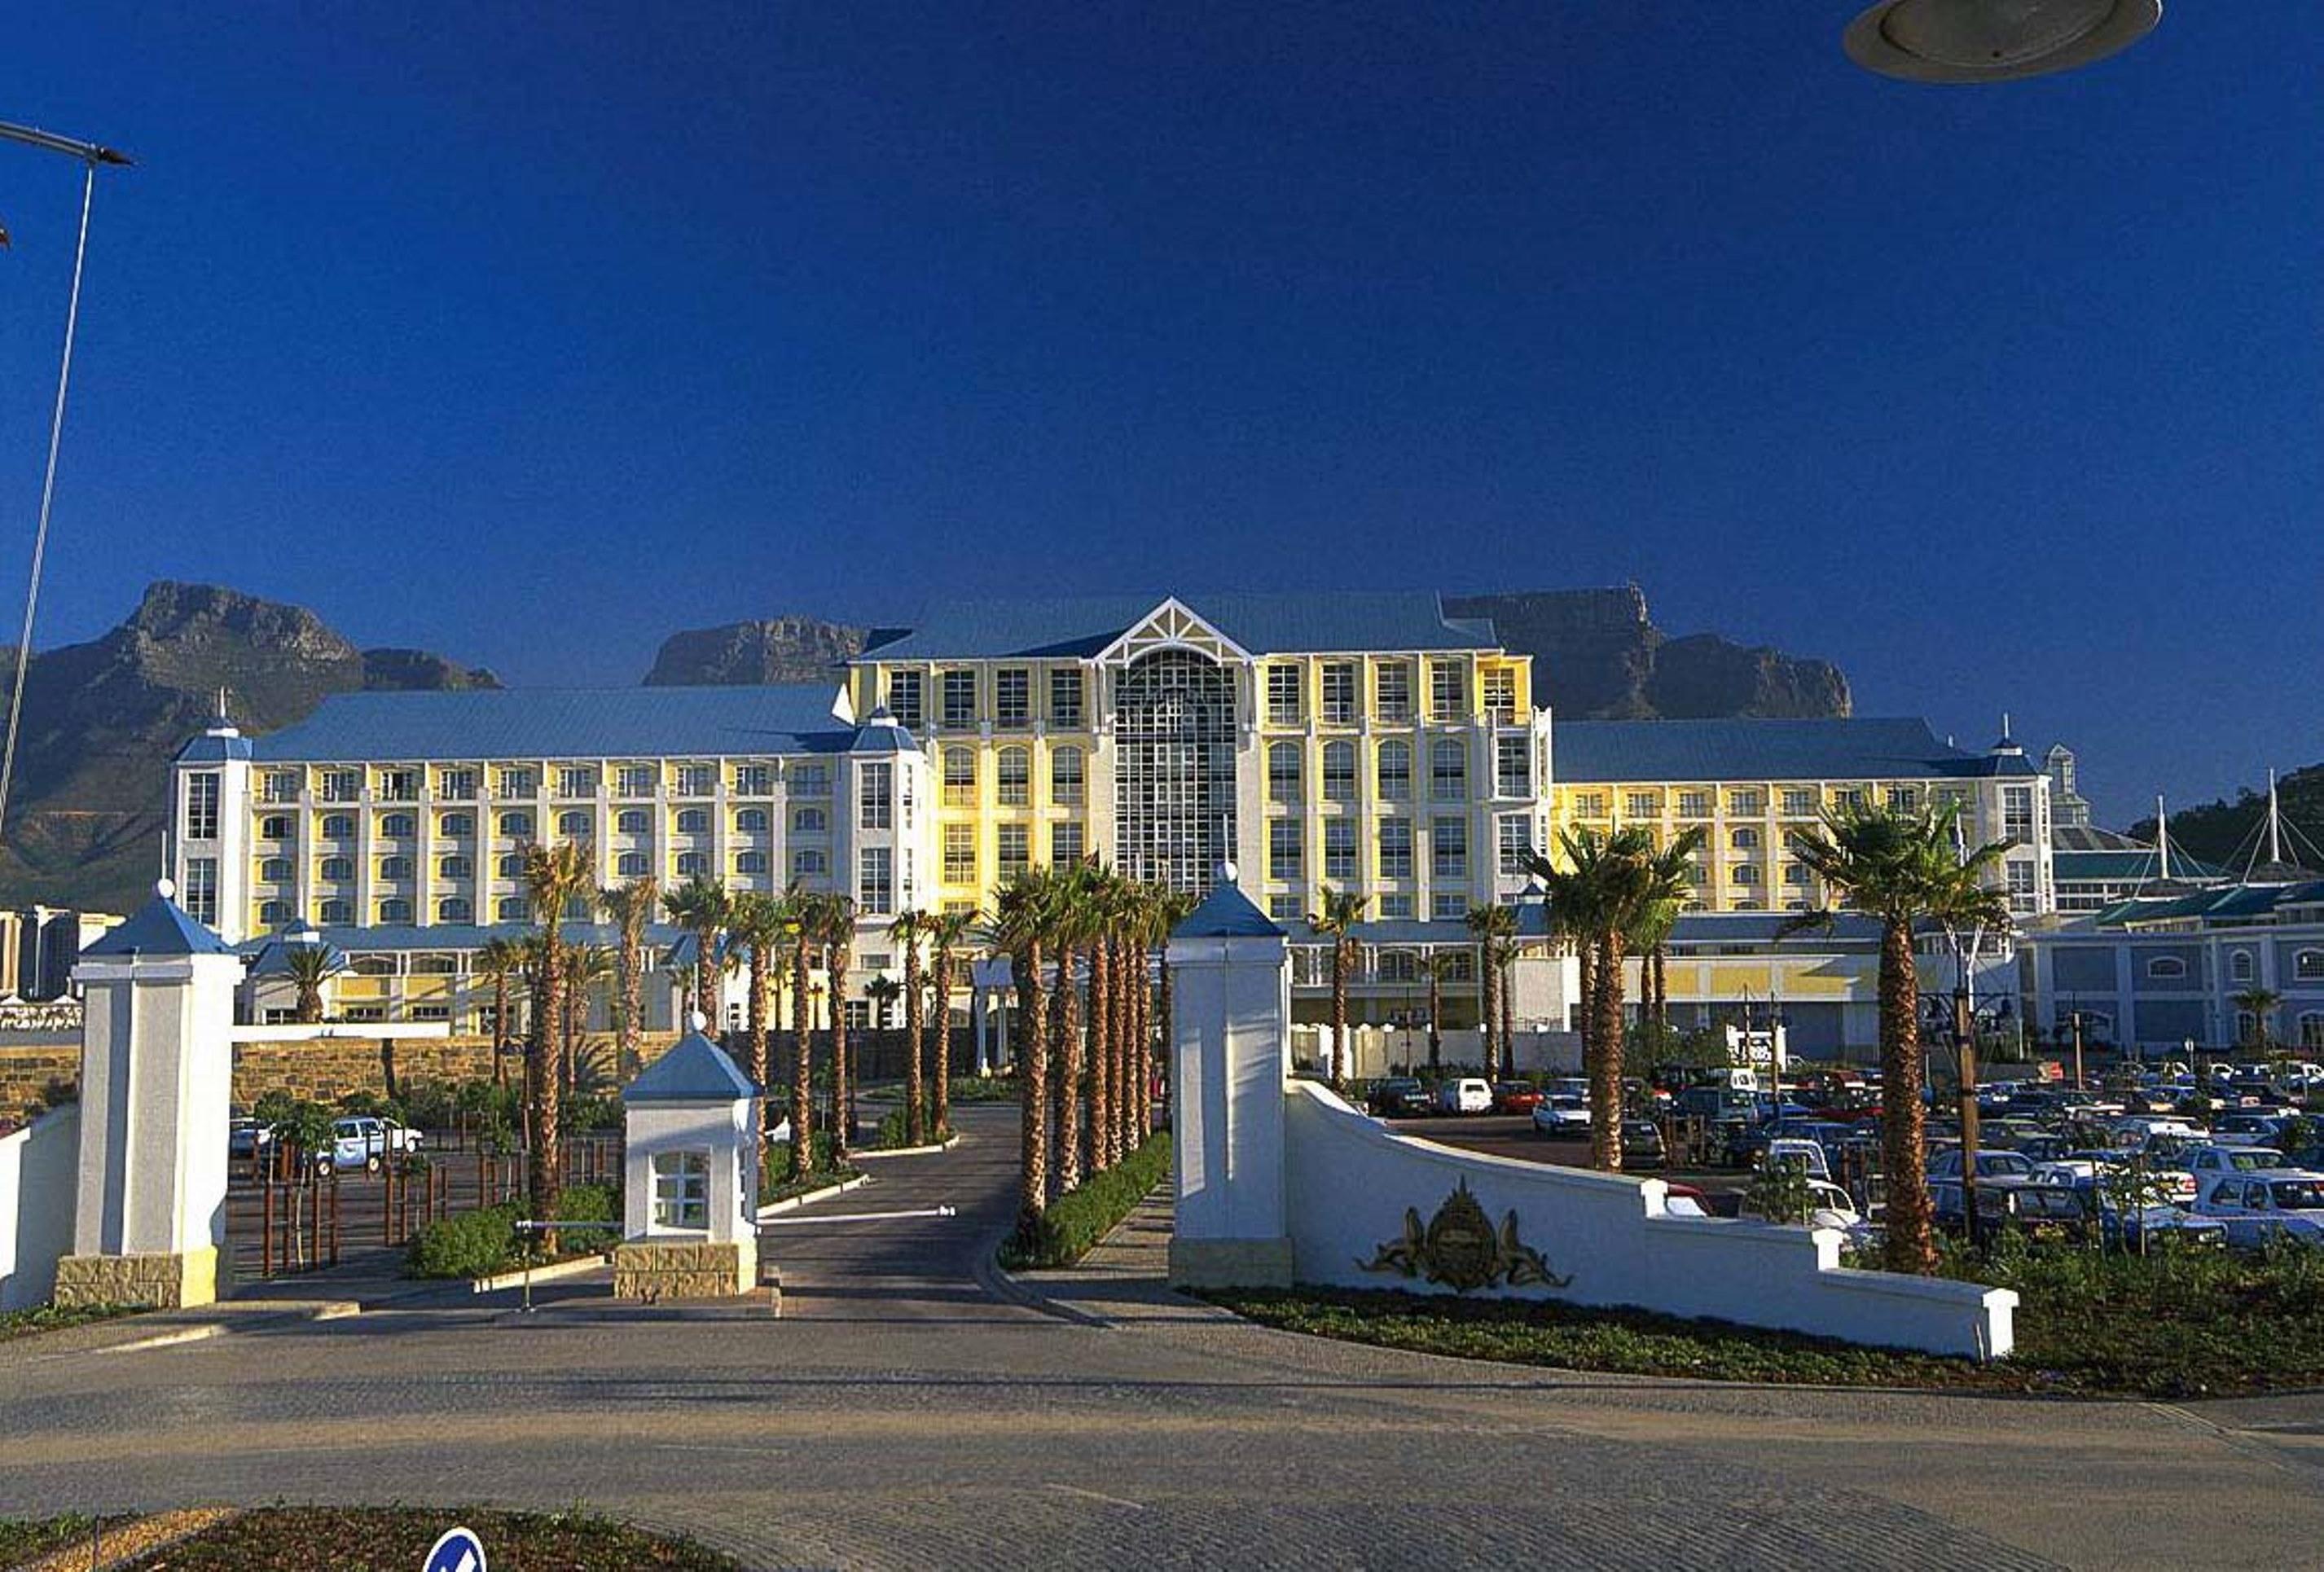 The Table Bay hotel image